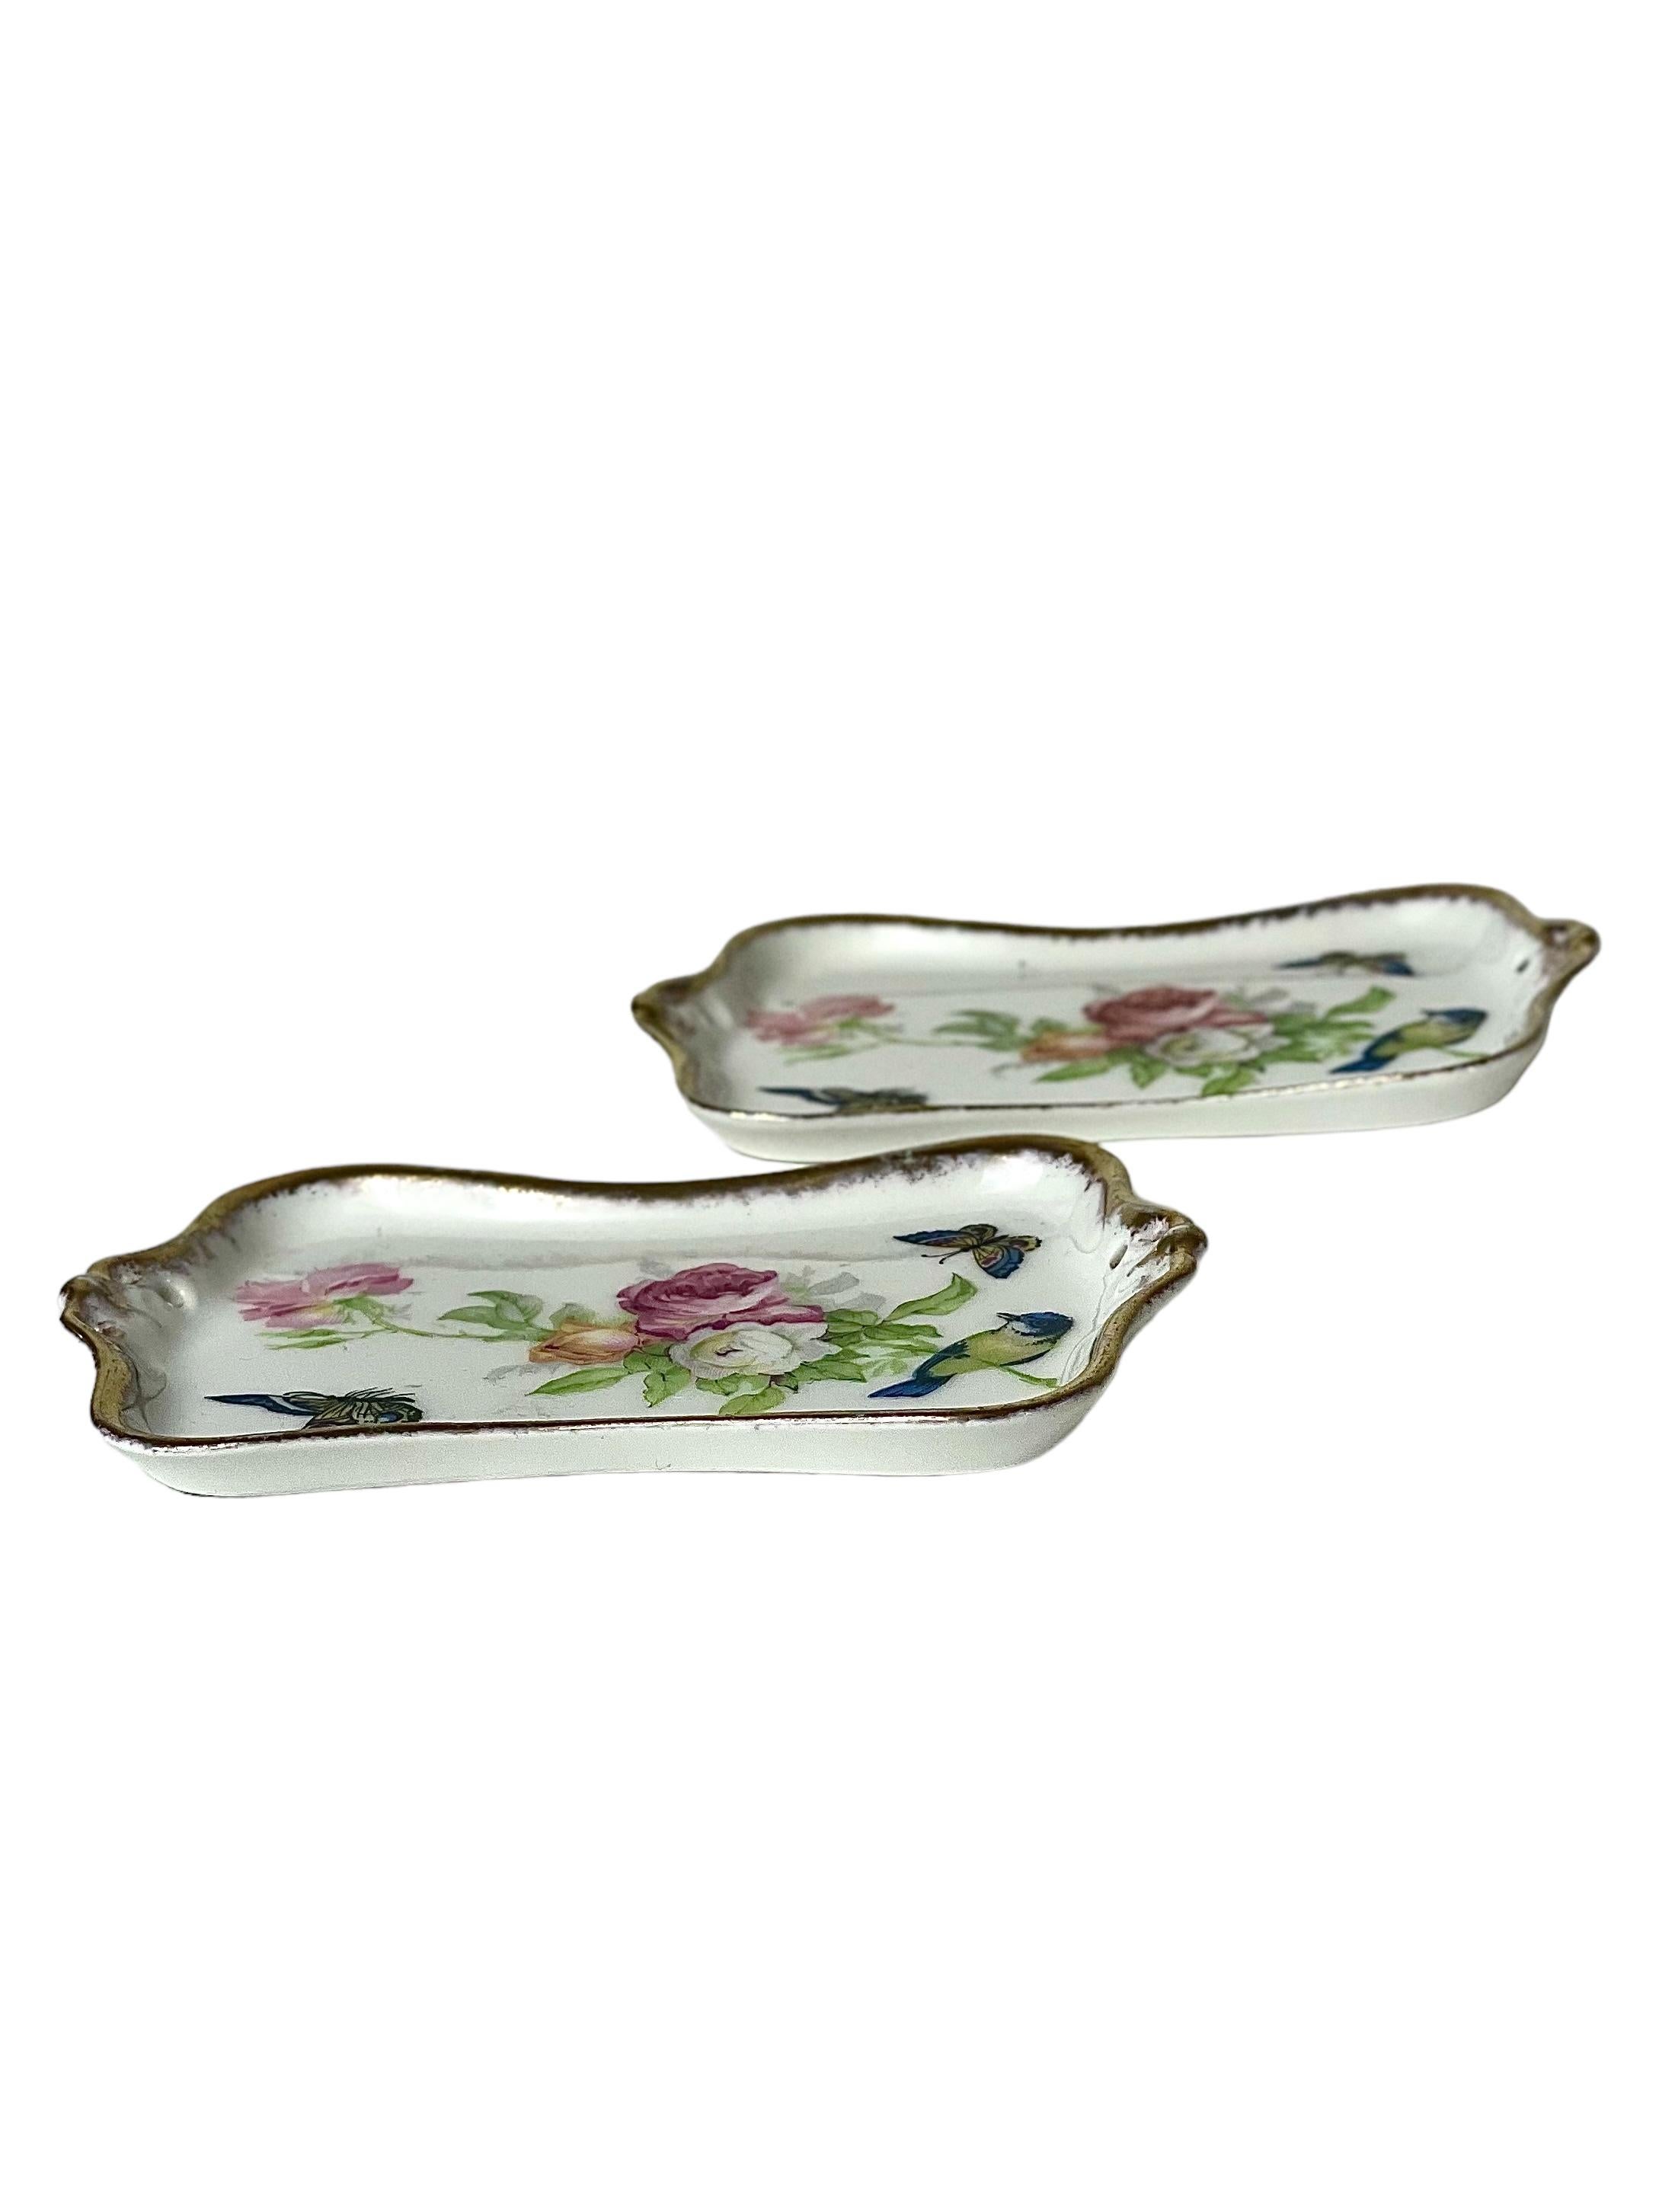 A charming pair of trinket dishes in delicate Limoges porcelain, beautifully painted with a spray of wild roses, butterflies and a blue tit, and edged in gilt around their rims. Known as 'vide poches' (emptying pockets) in French, these useful